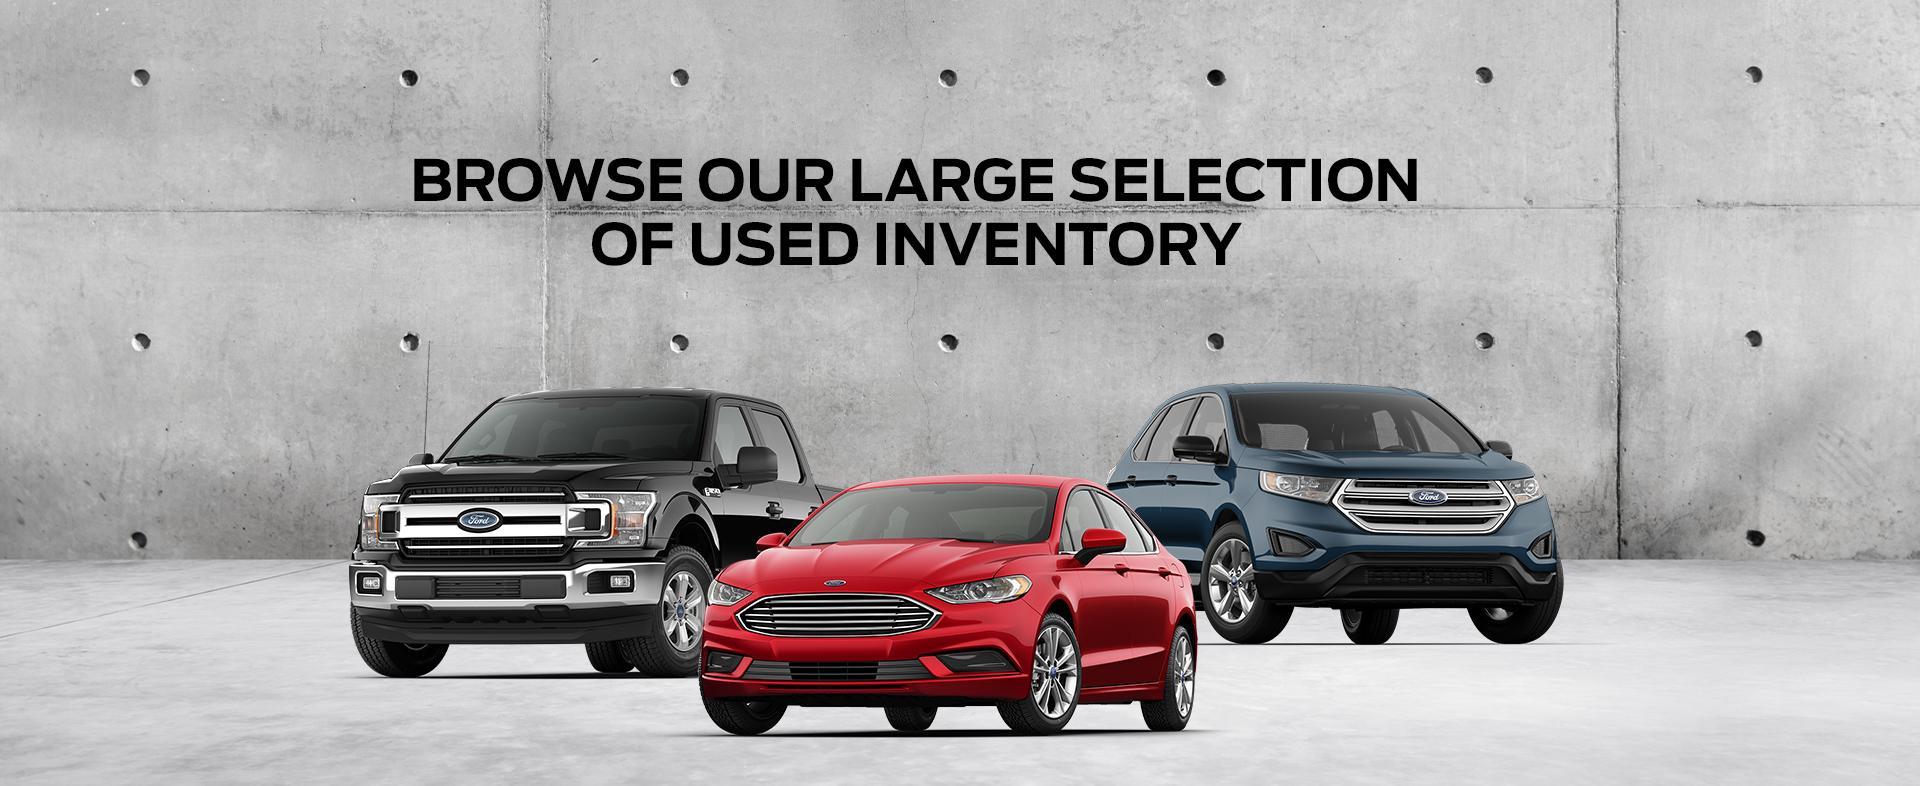 Ford Used Inventory